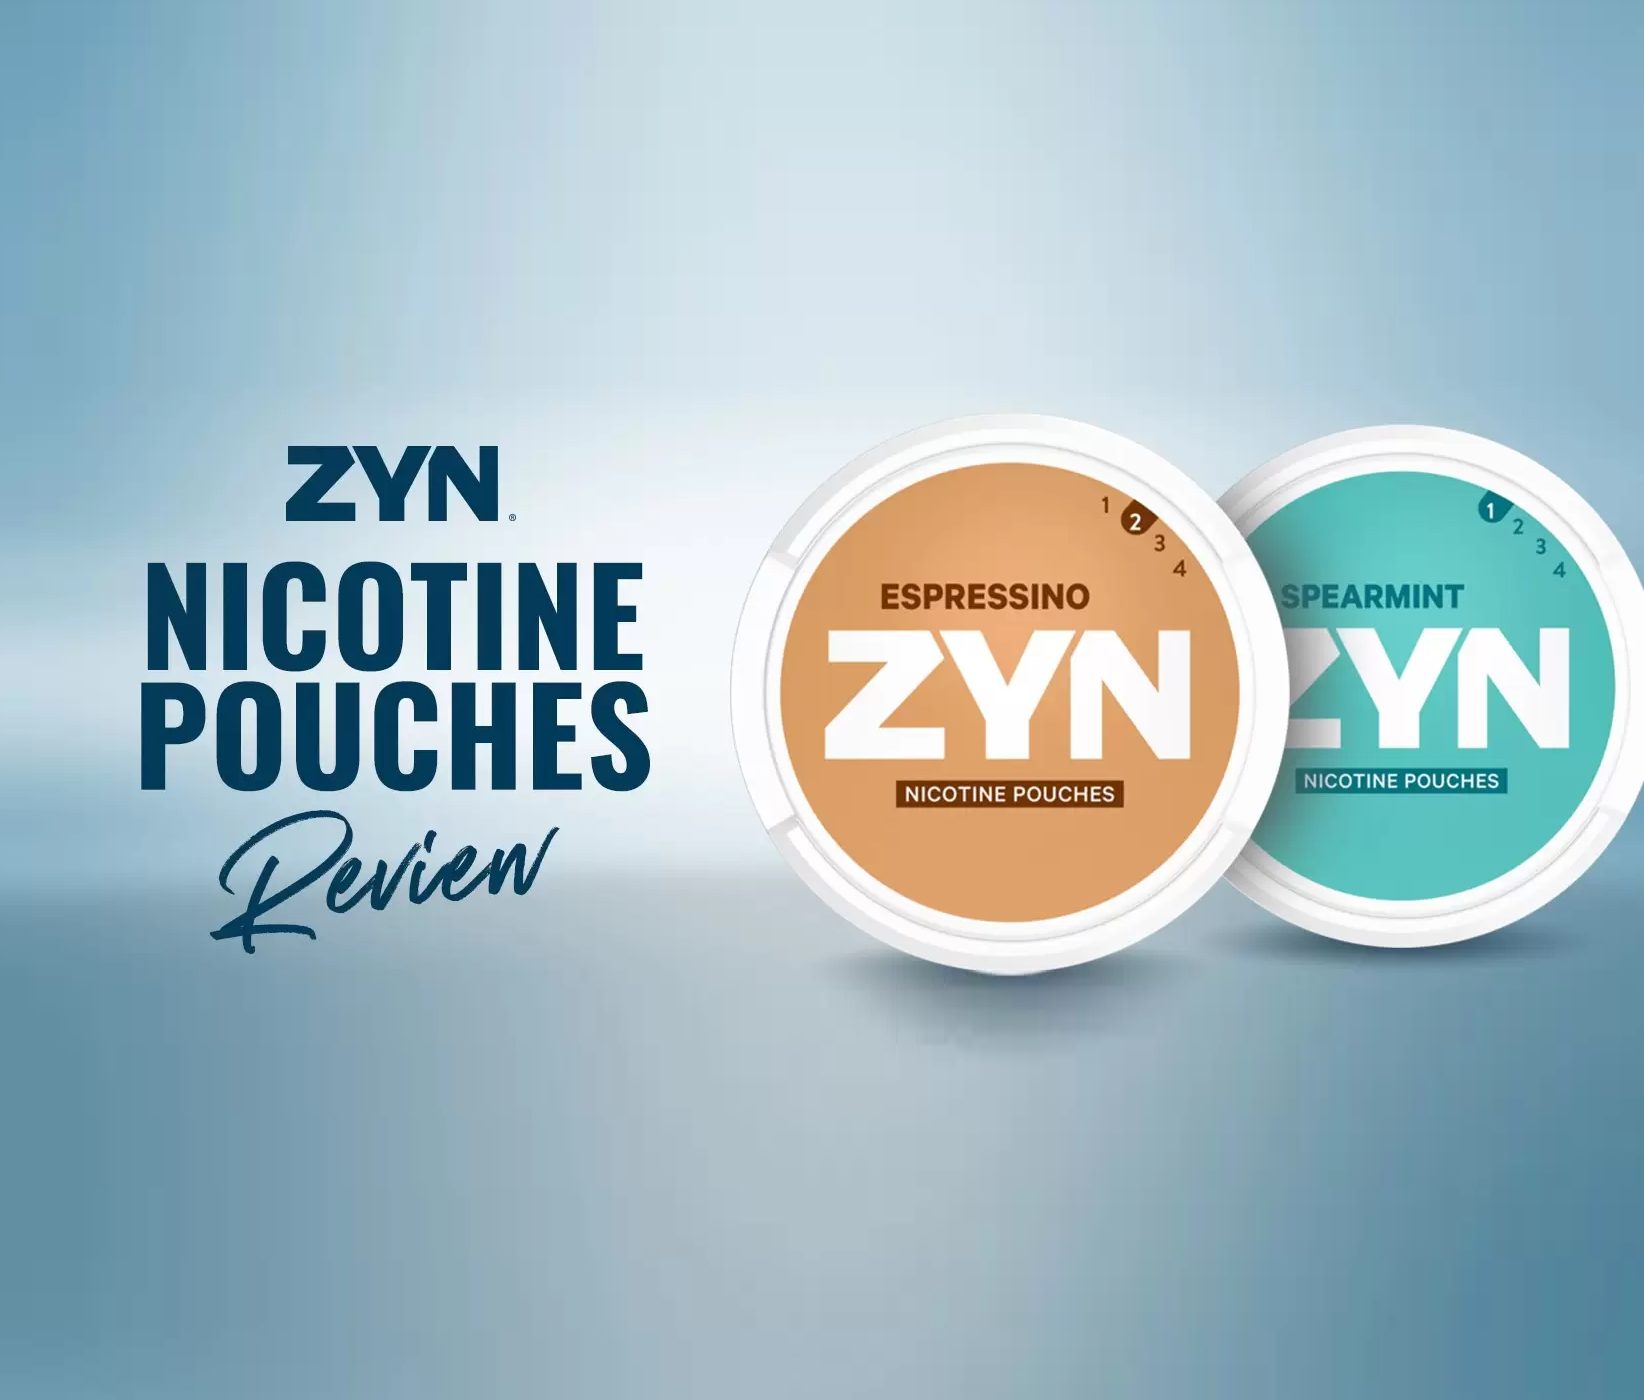 research on zyn pouches